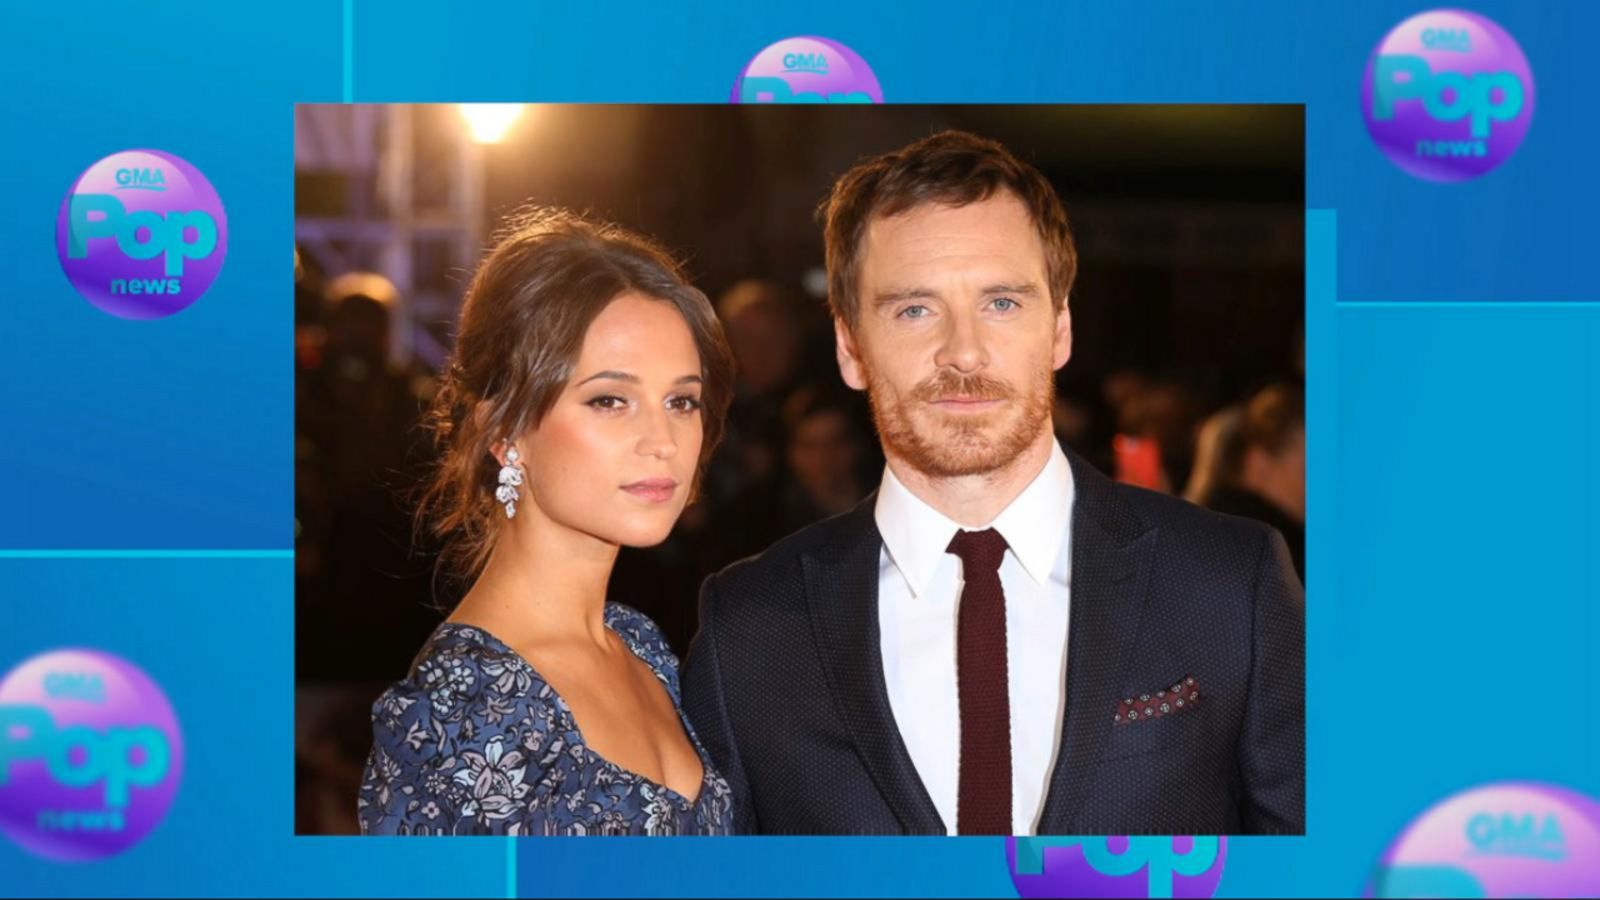 Michael Fassbender and Alicia Vikander say 'I do,' plus more news